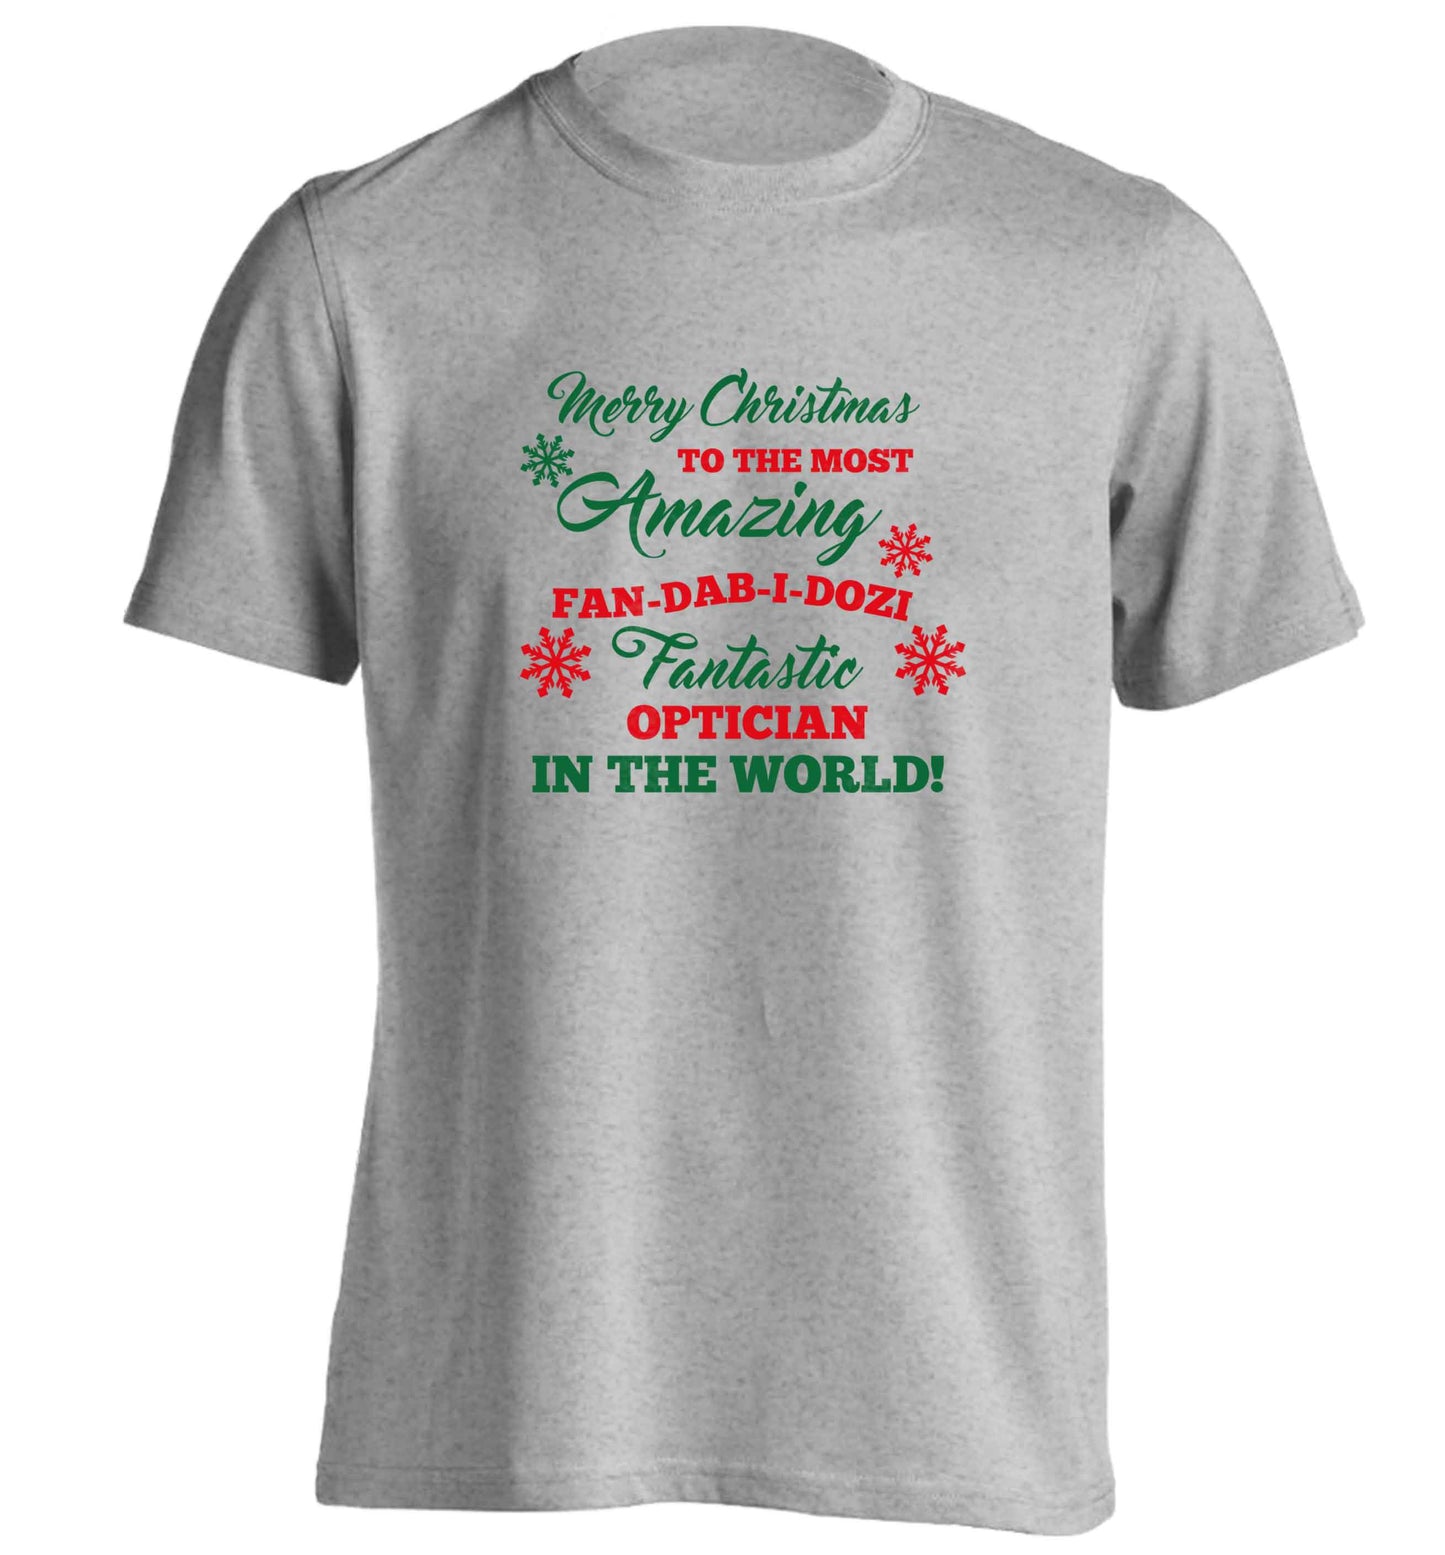 Merry Christmas to the most amazing optician in the world! adults unisex grey Tshirt 2XL